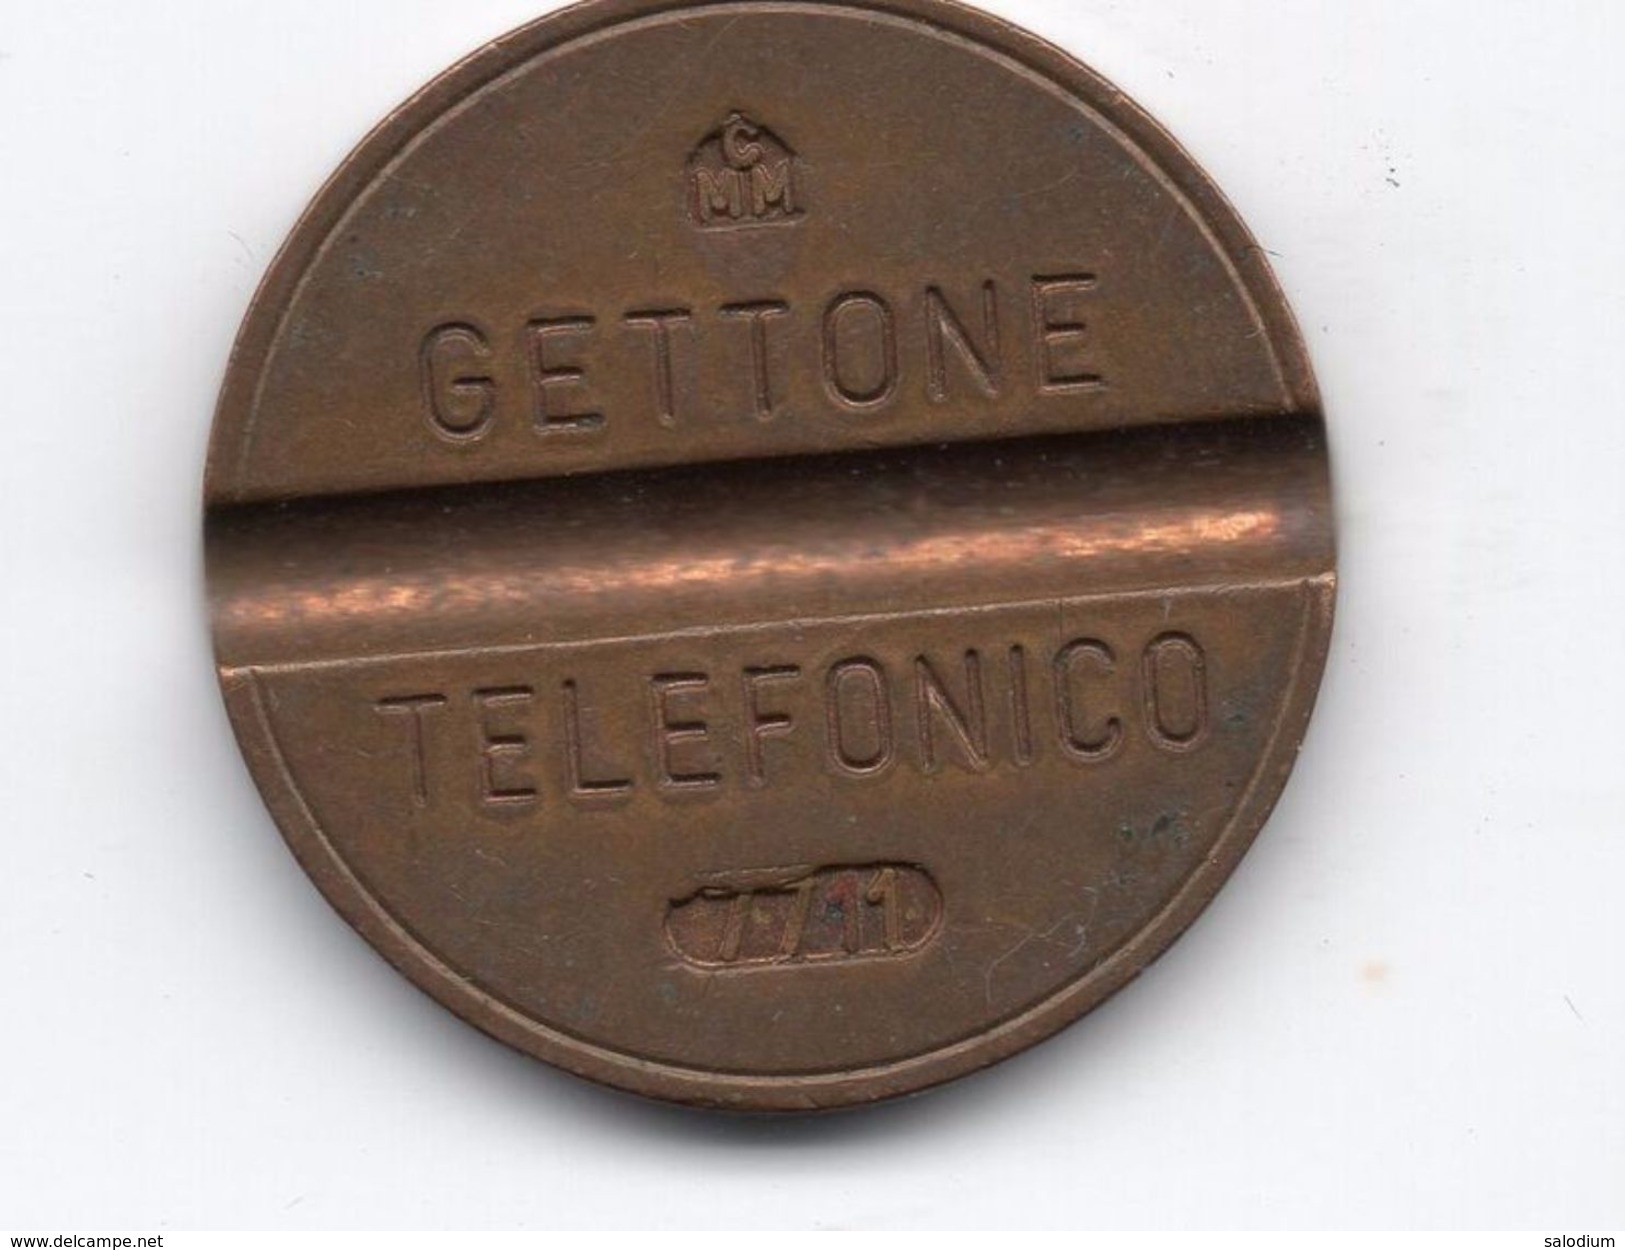 Gettone Telefonico 7711  Token Telephone - (Id-860) - Professionals/Firms